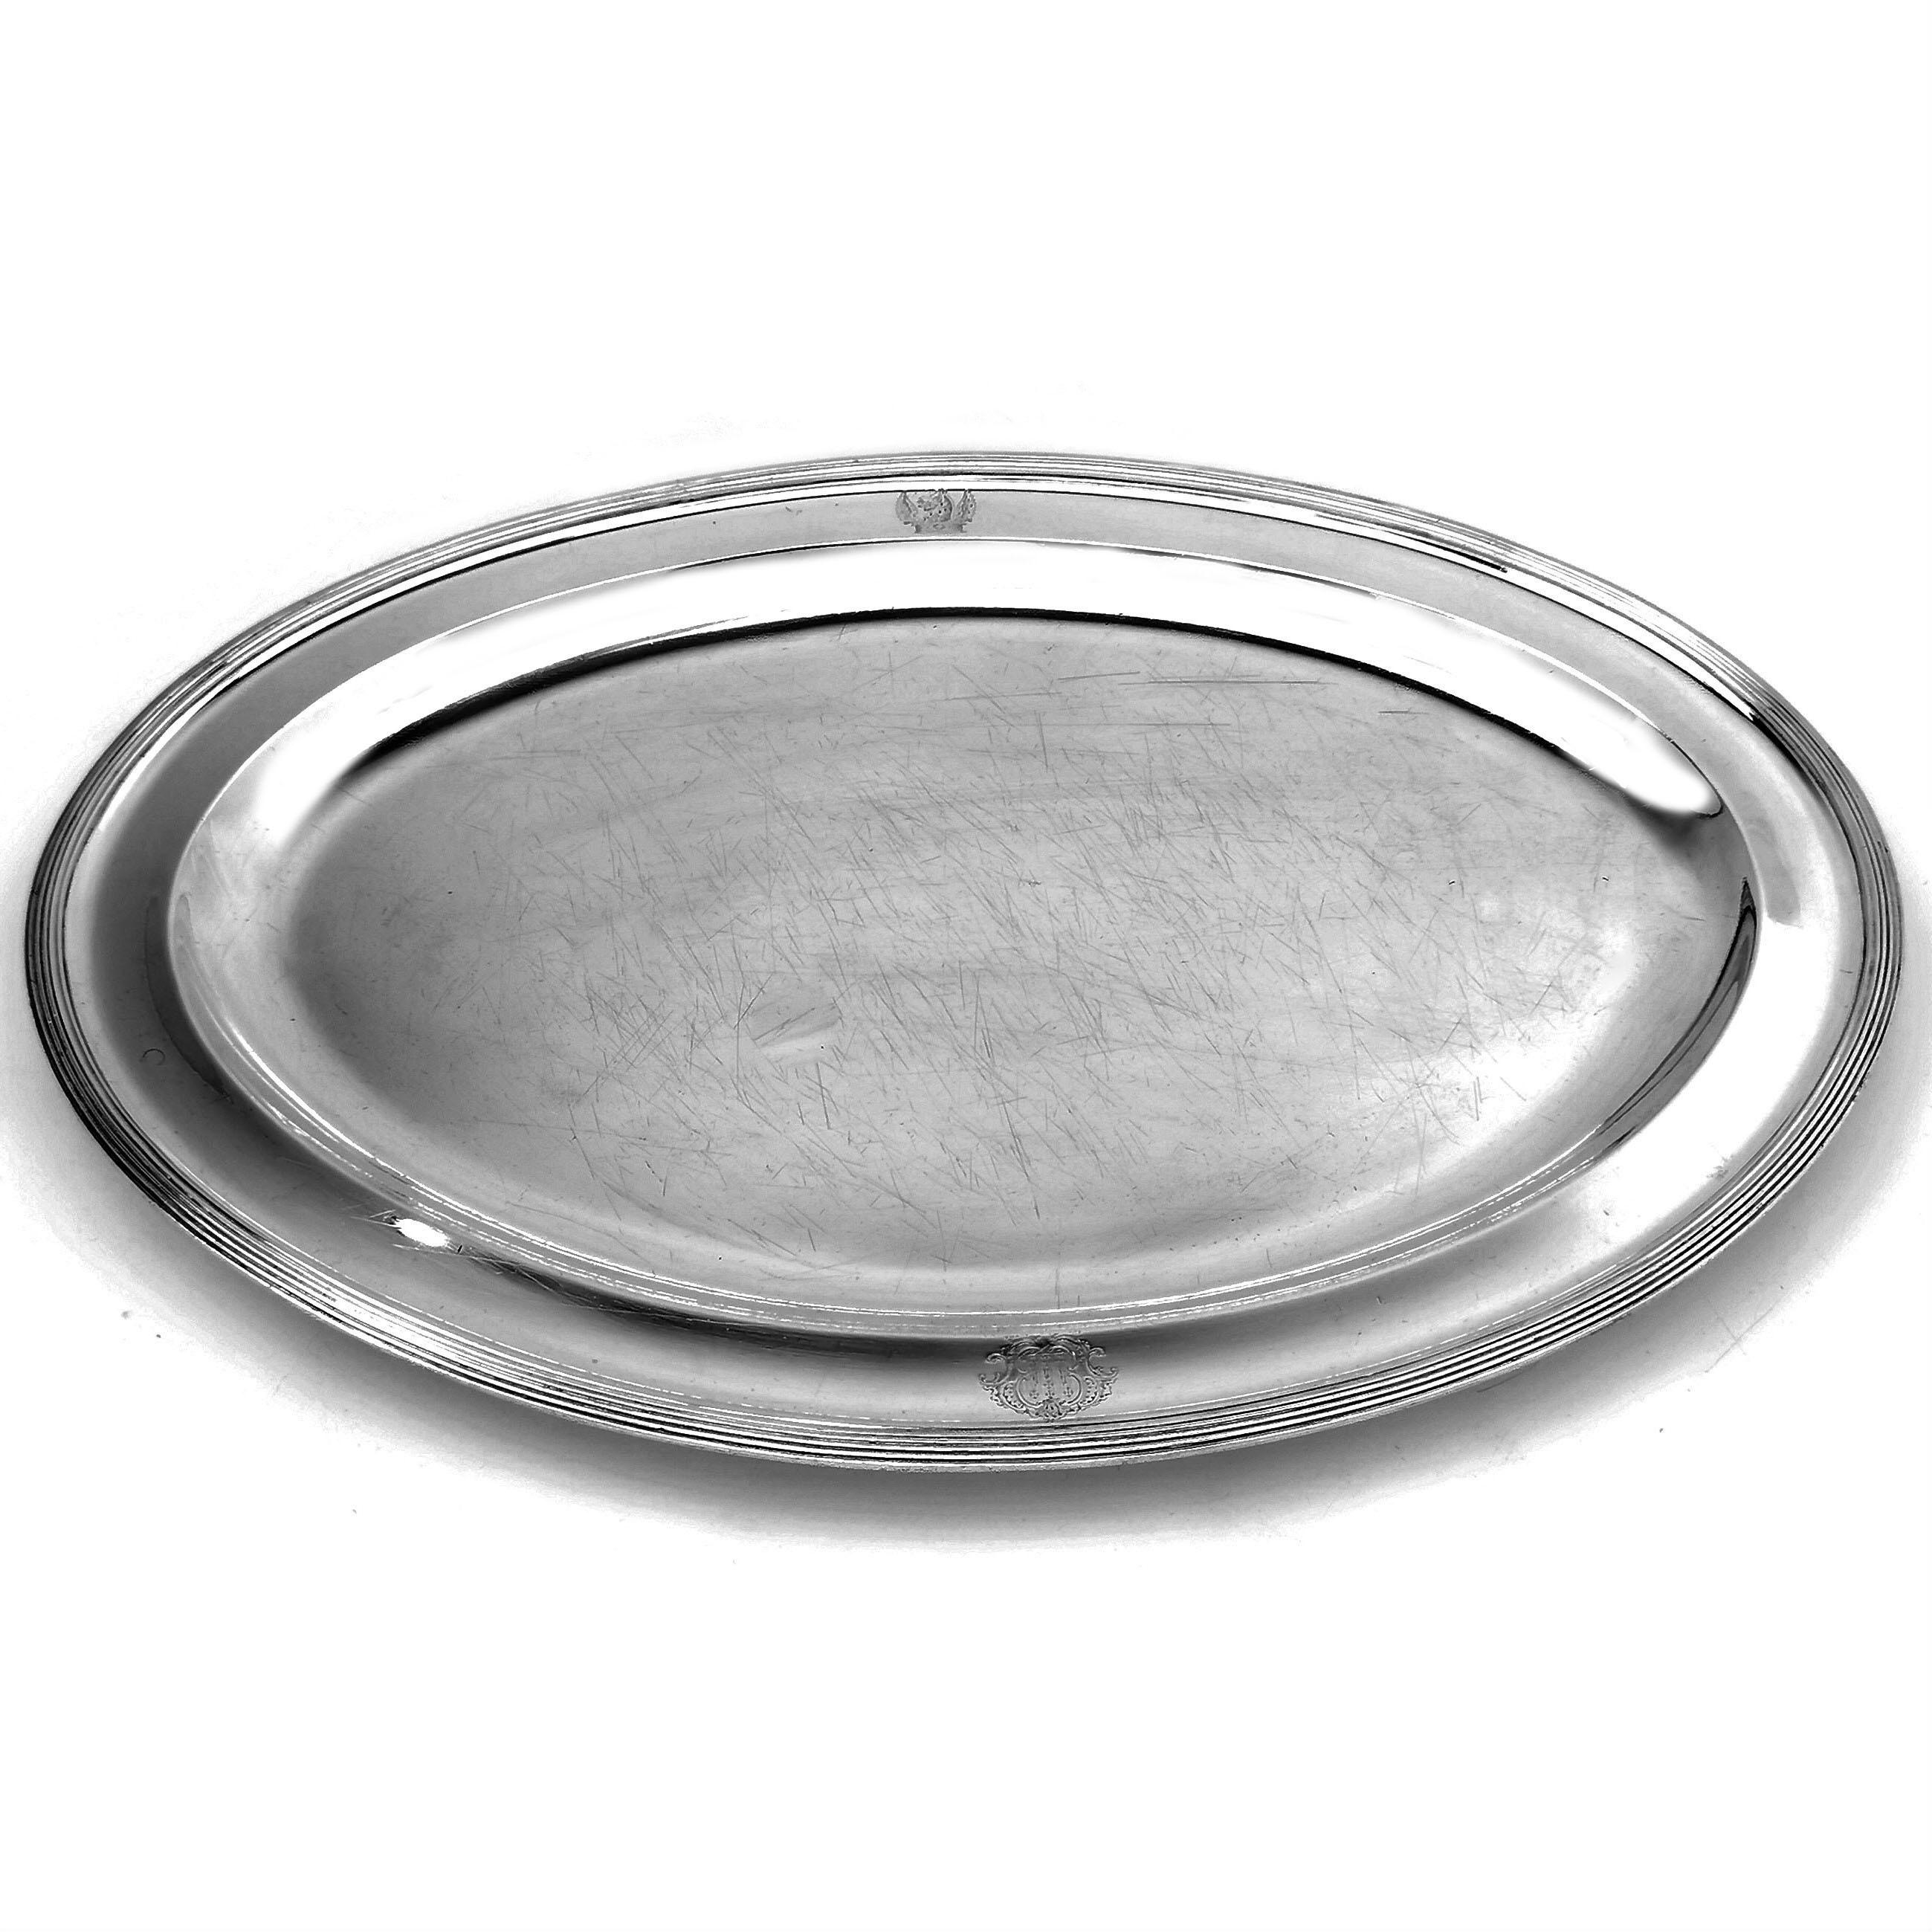 A Classic Antique George III solid Silver Meat Platter. This Georgian Meat Platter has a traditional oval shape with a elegant reeded border along the exterior edge. The rim of the Serving Platter has two small crests engraved with one on each of